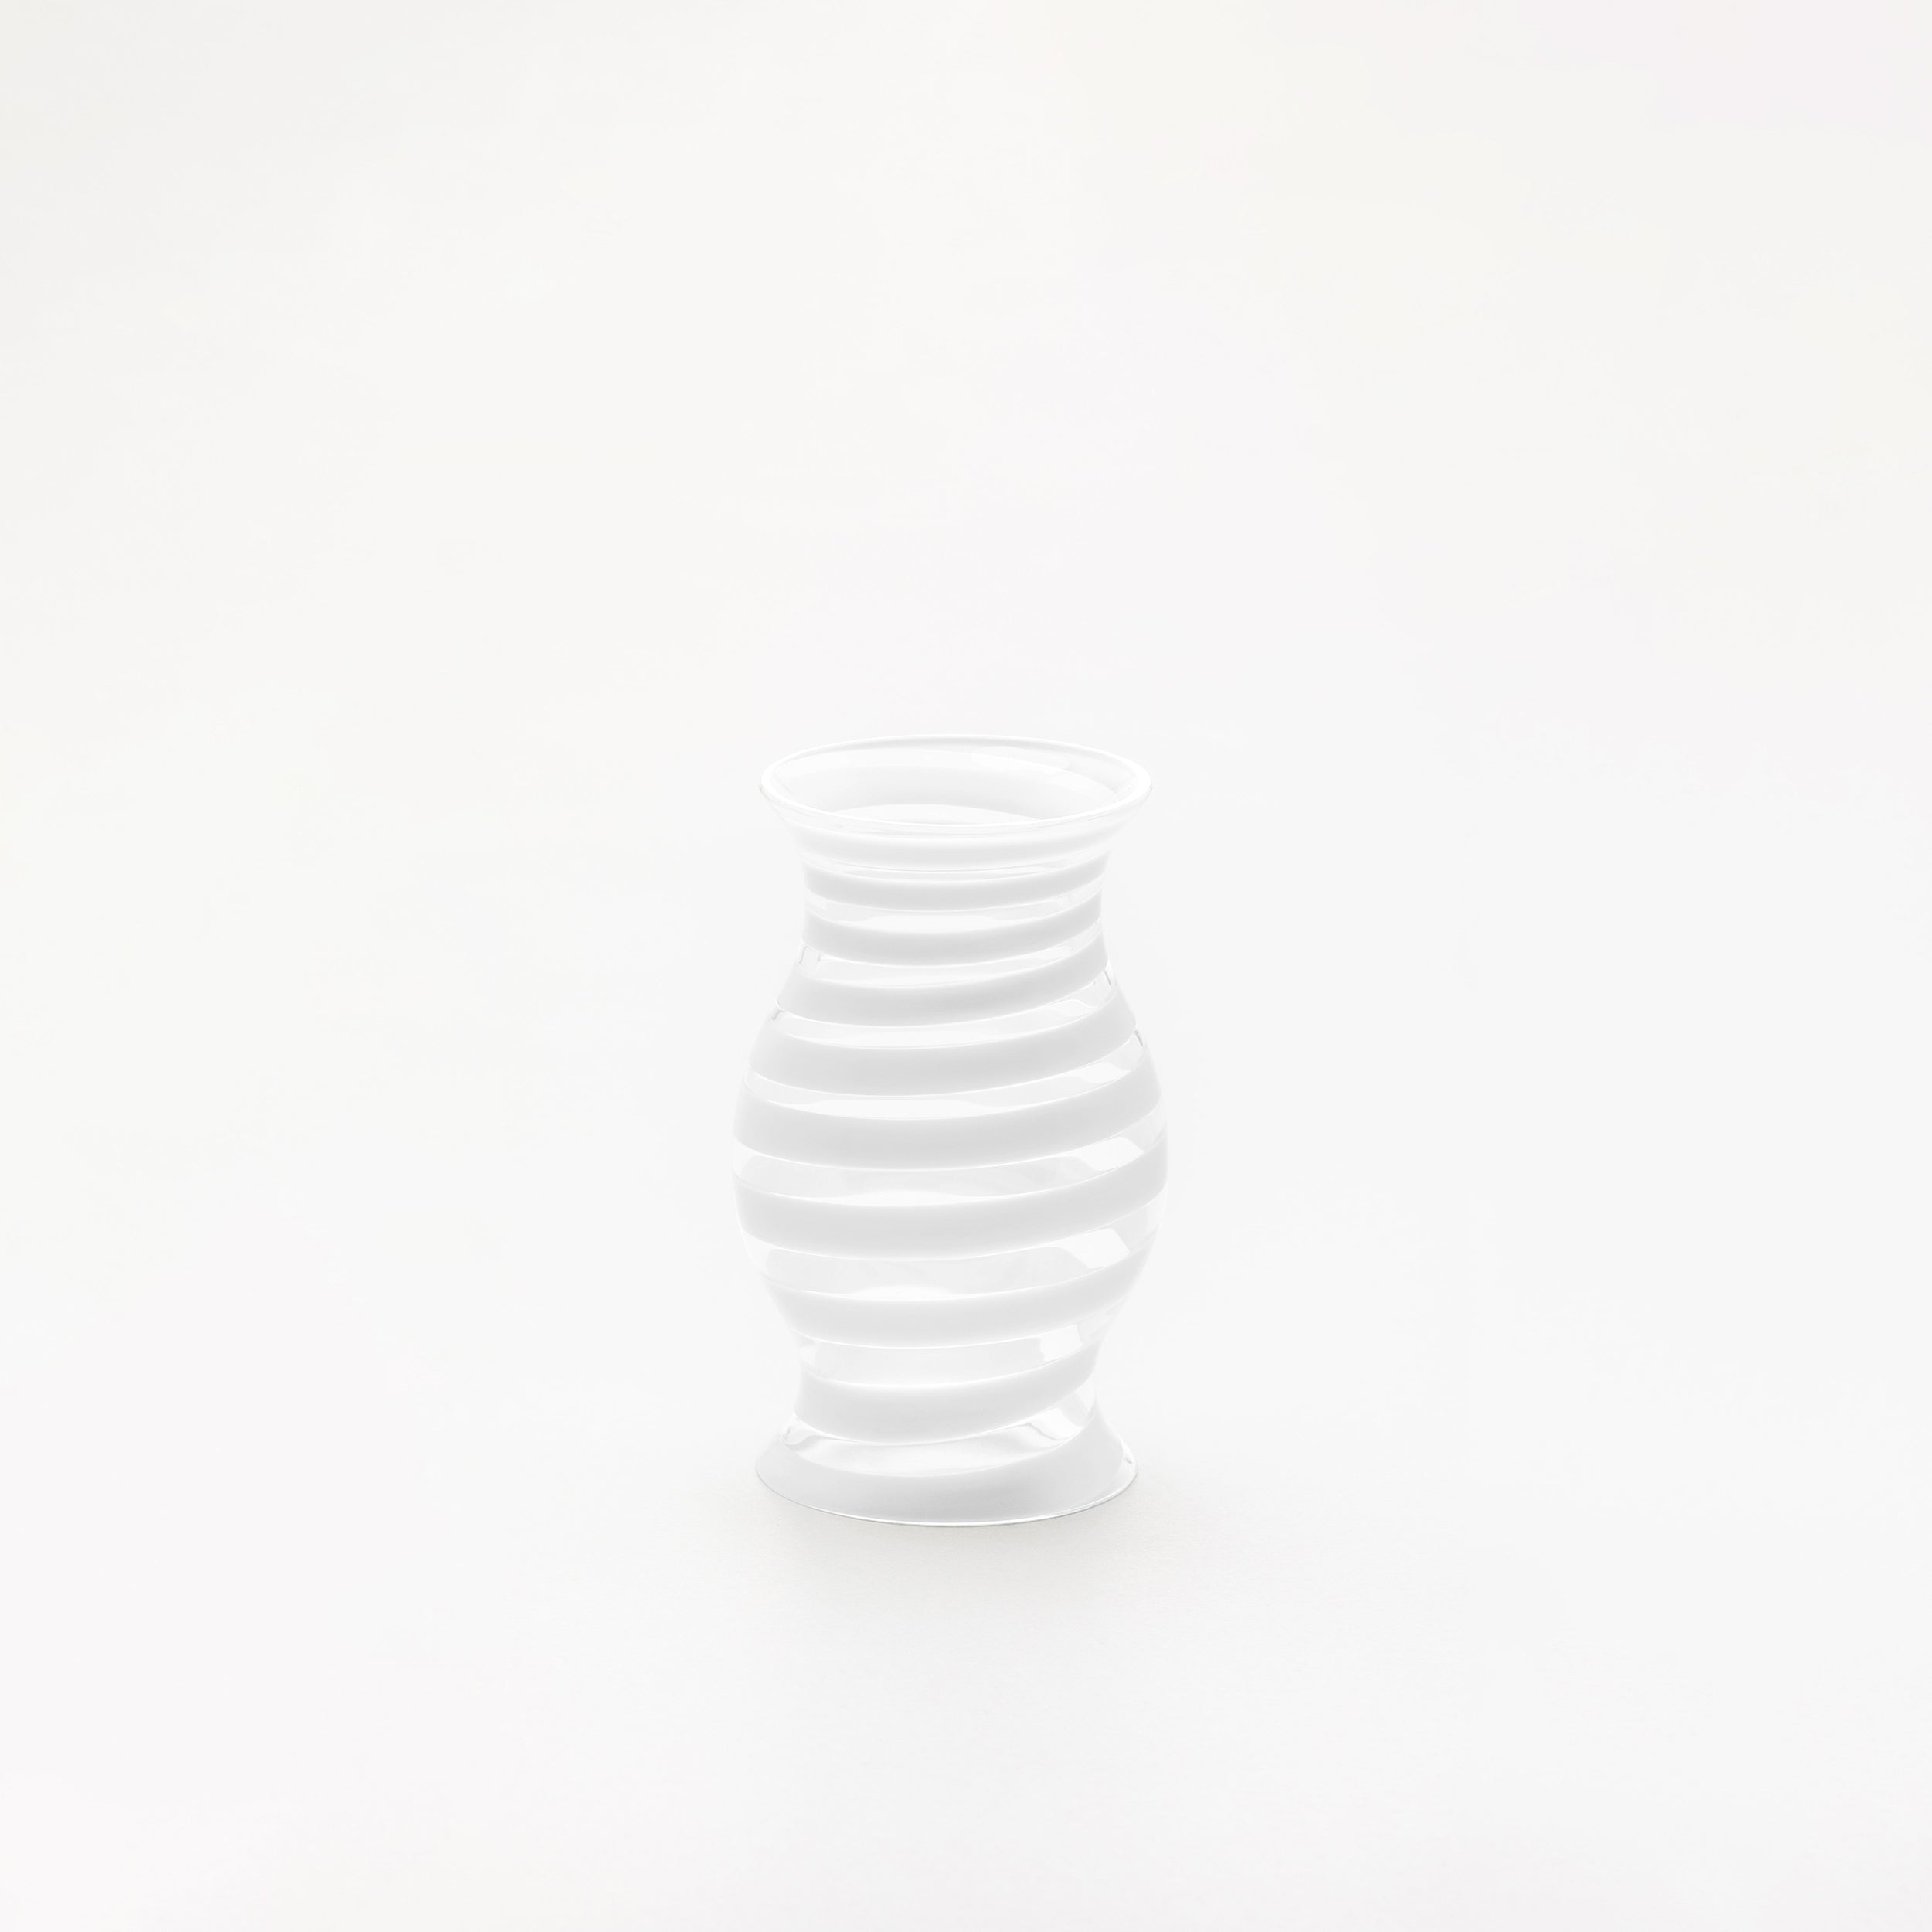 YALI A NASTRO CANDLE COVER WHITE